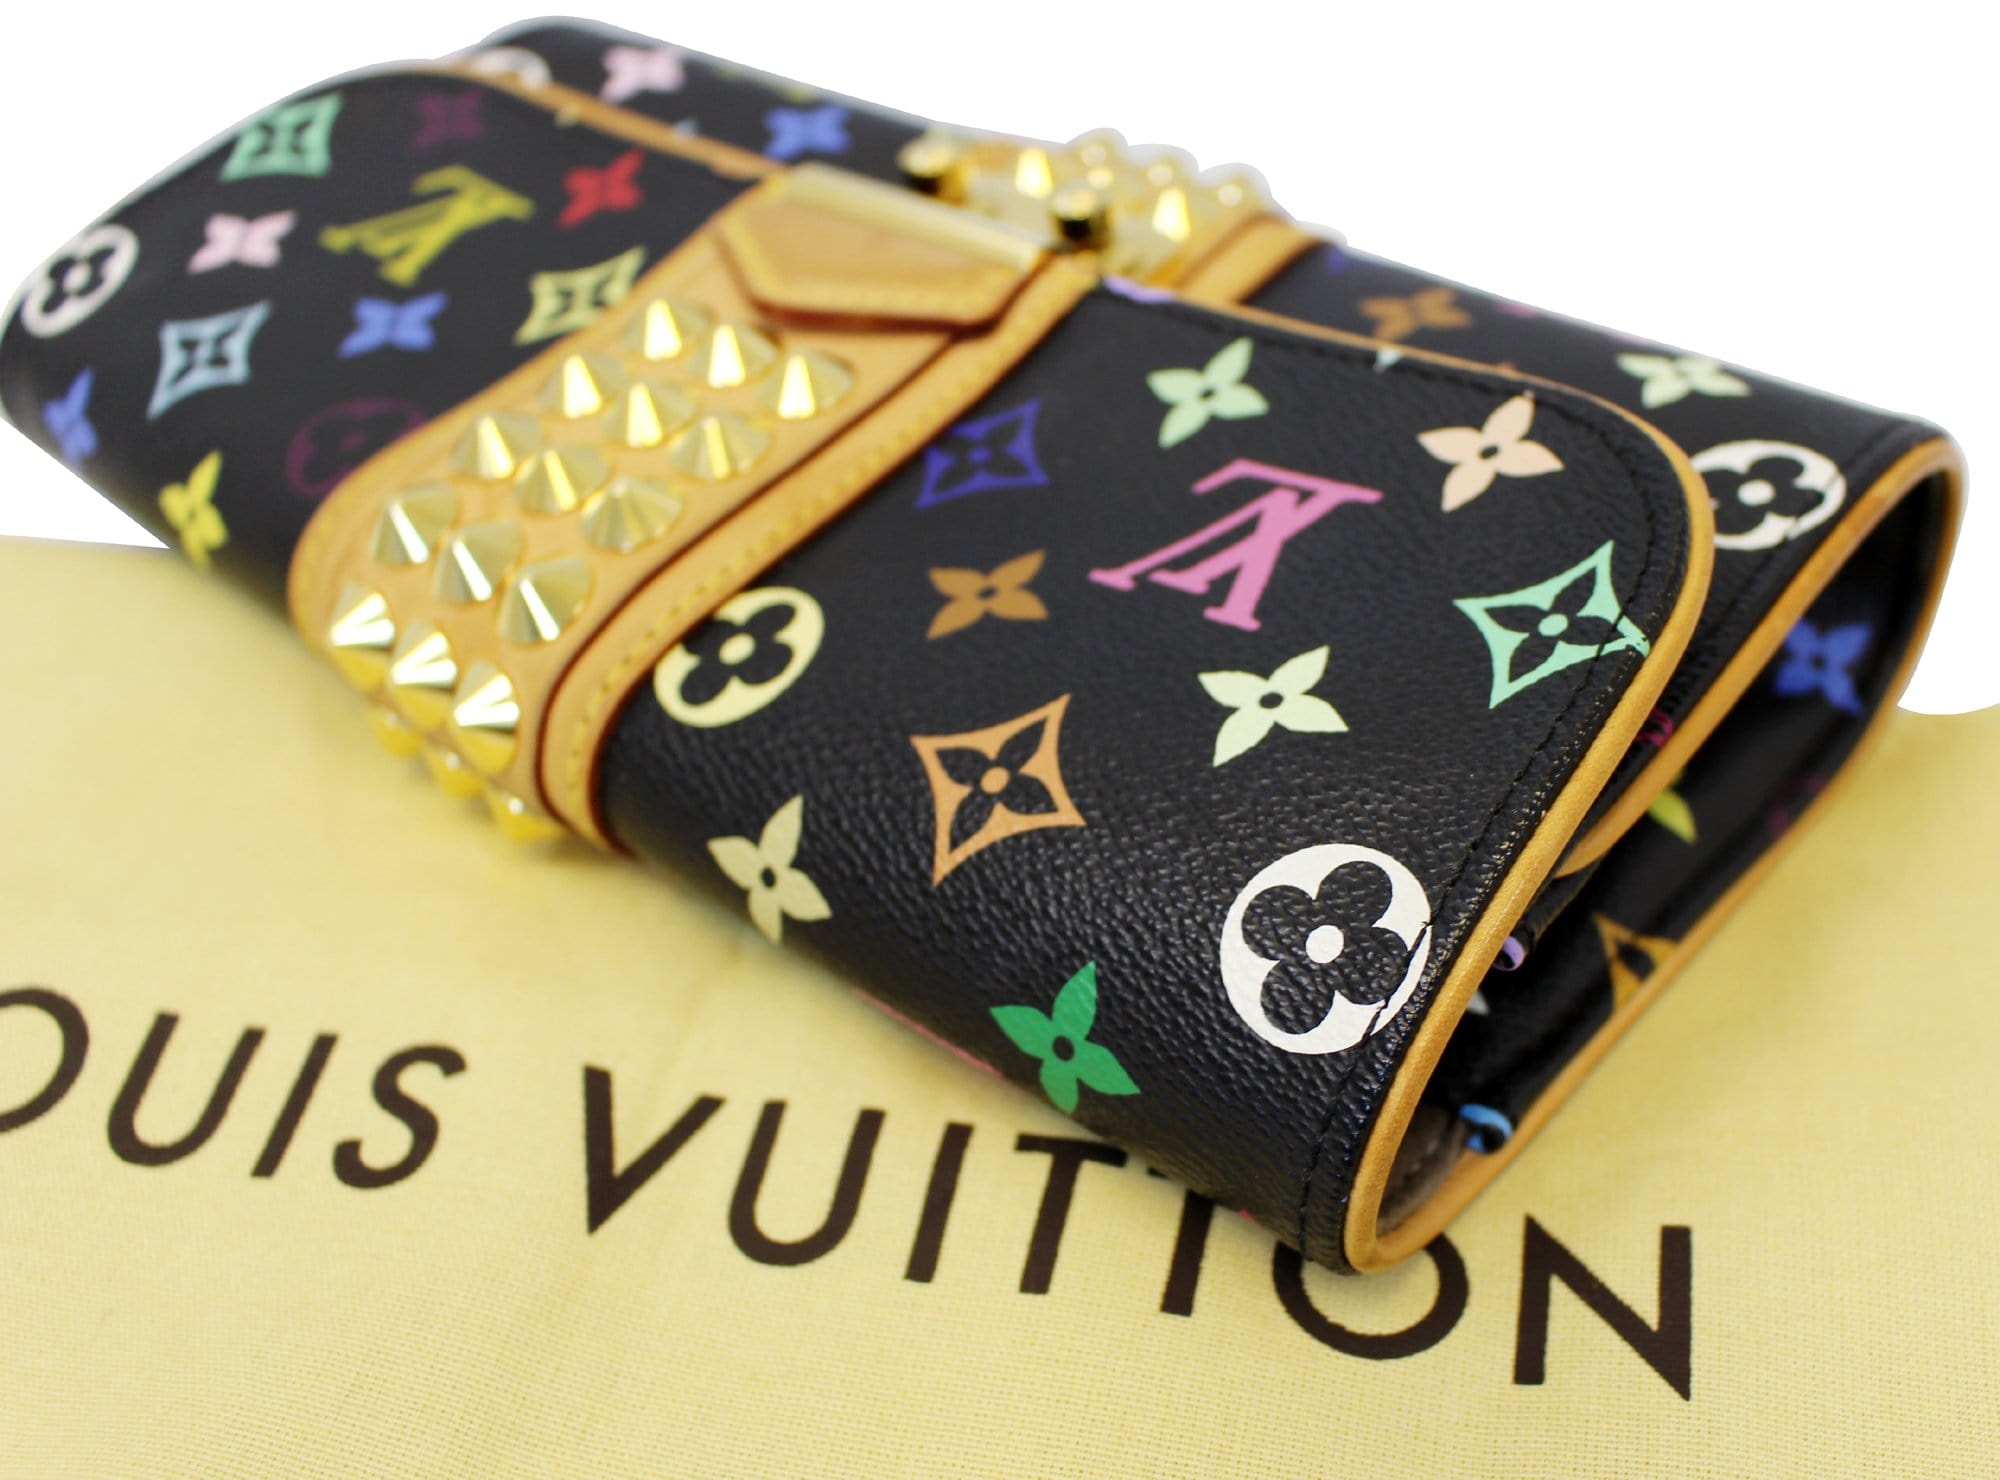 Louis Vuitton Courtney - For Sale on 1stDibs  louis vuitton courtney  clutch, lv courtney, louis vuitton courtney bag